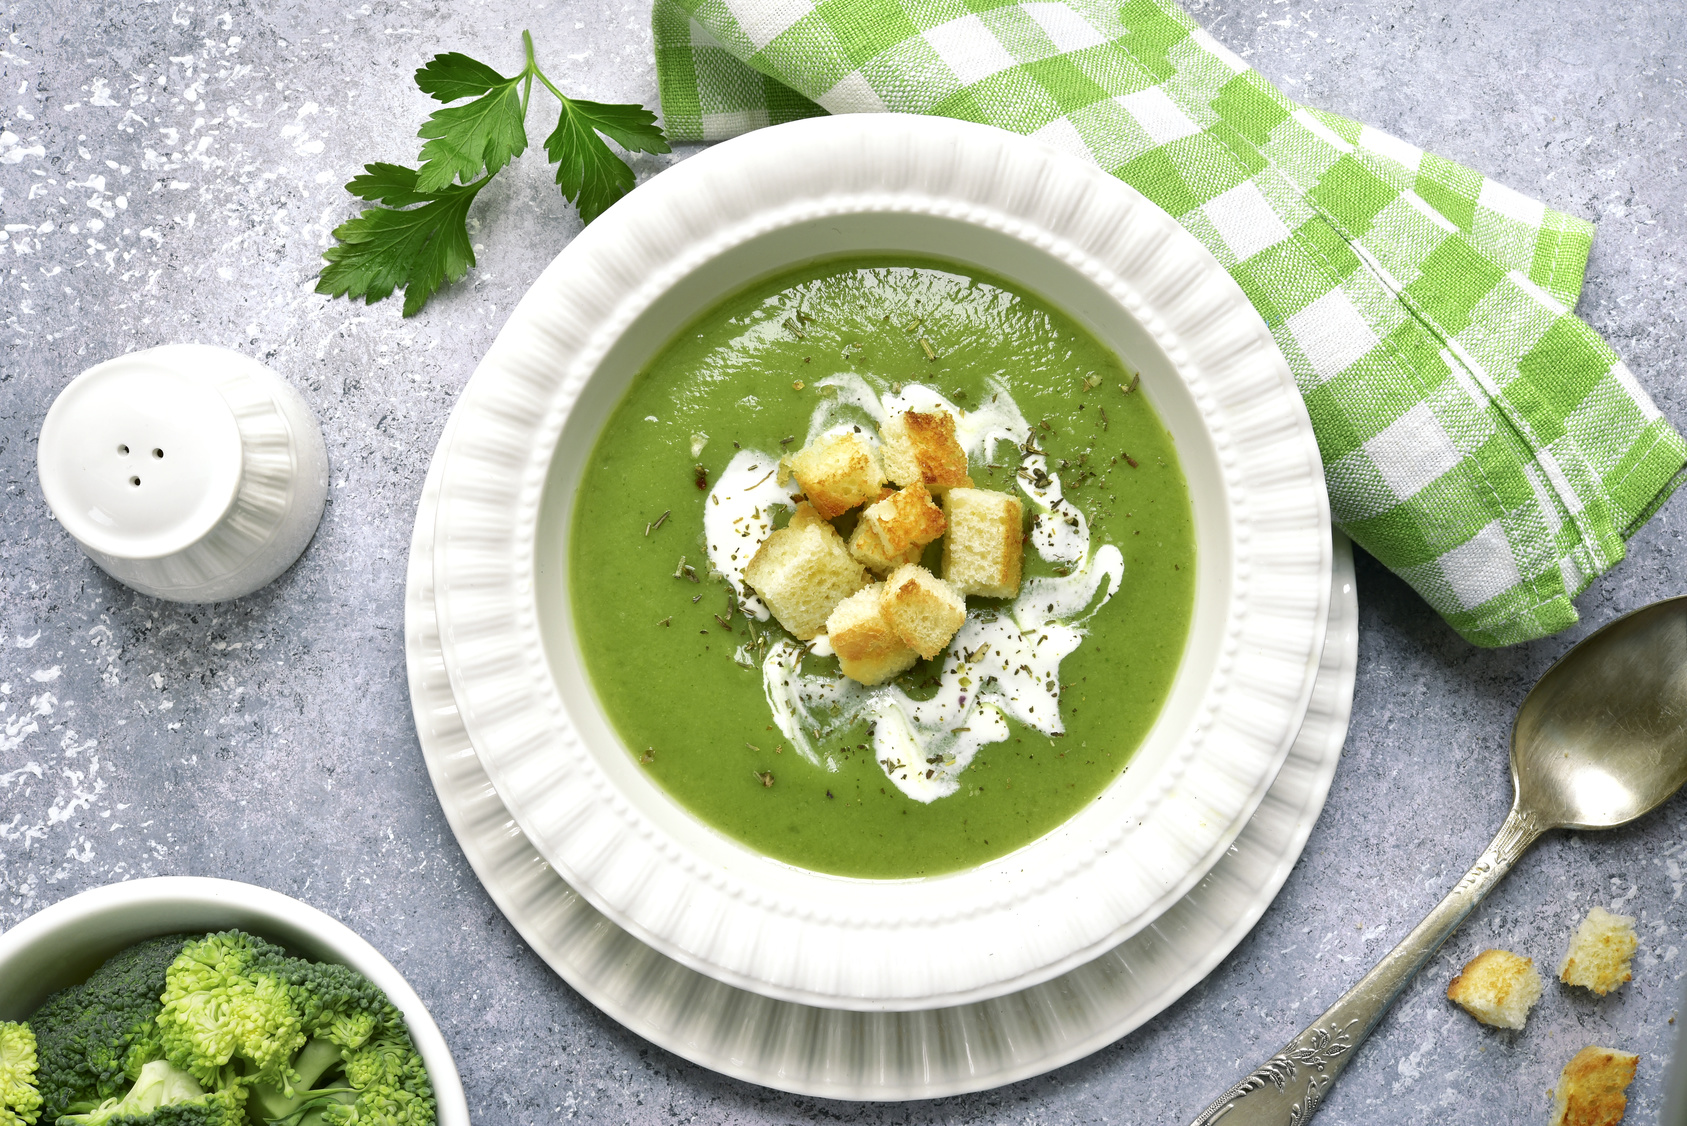 Broccoli pureed soup with croutons in a white plate on a light slate, stone or concrete background.Top view.